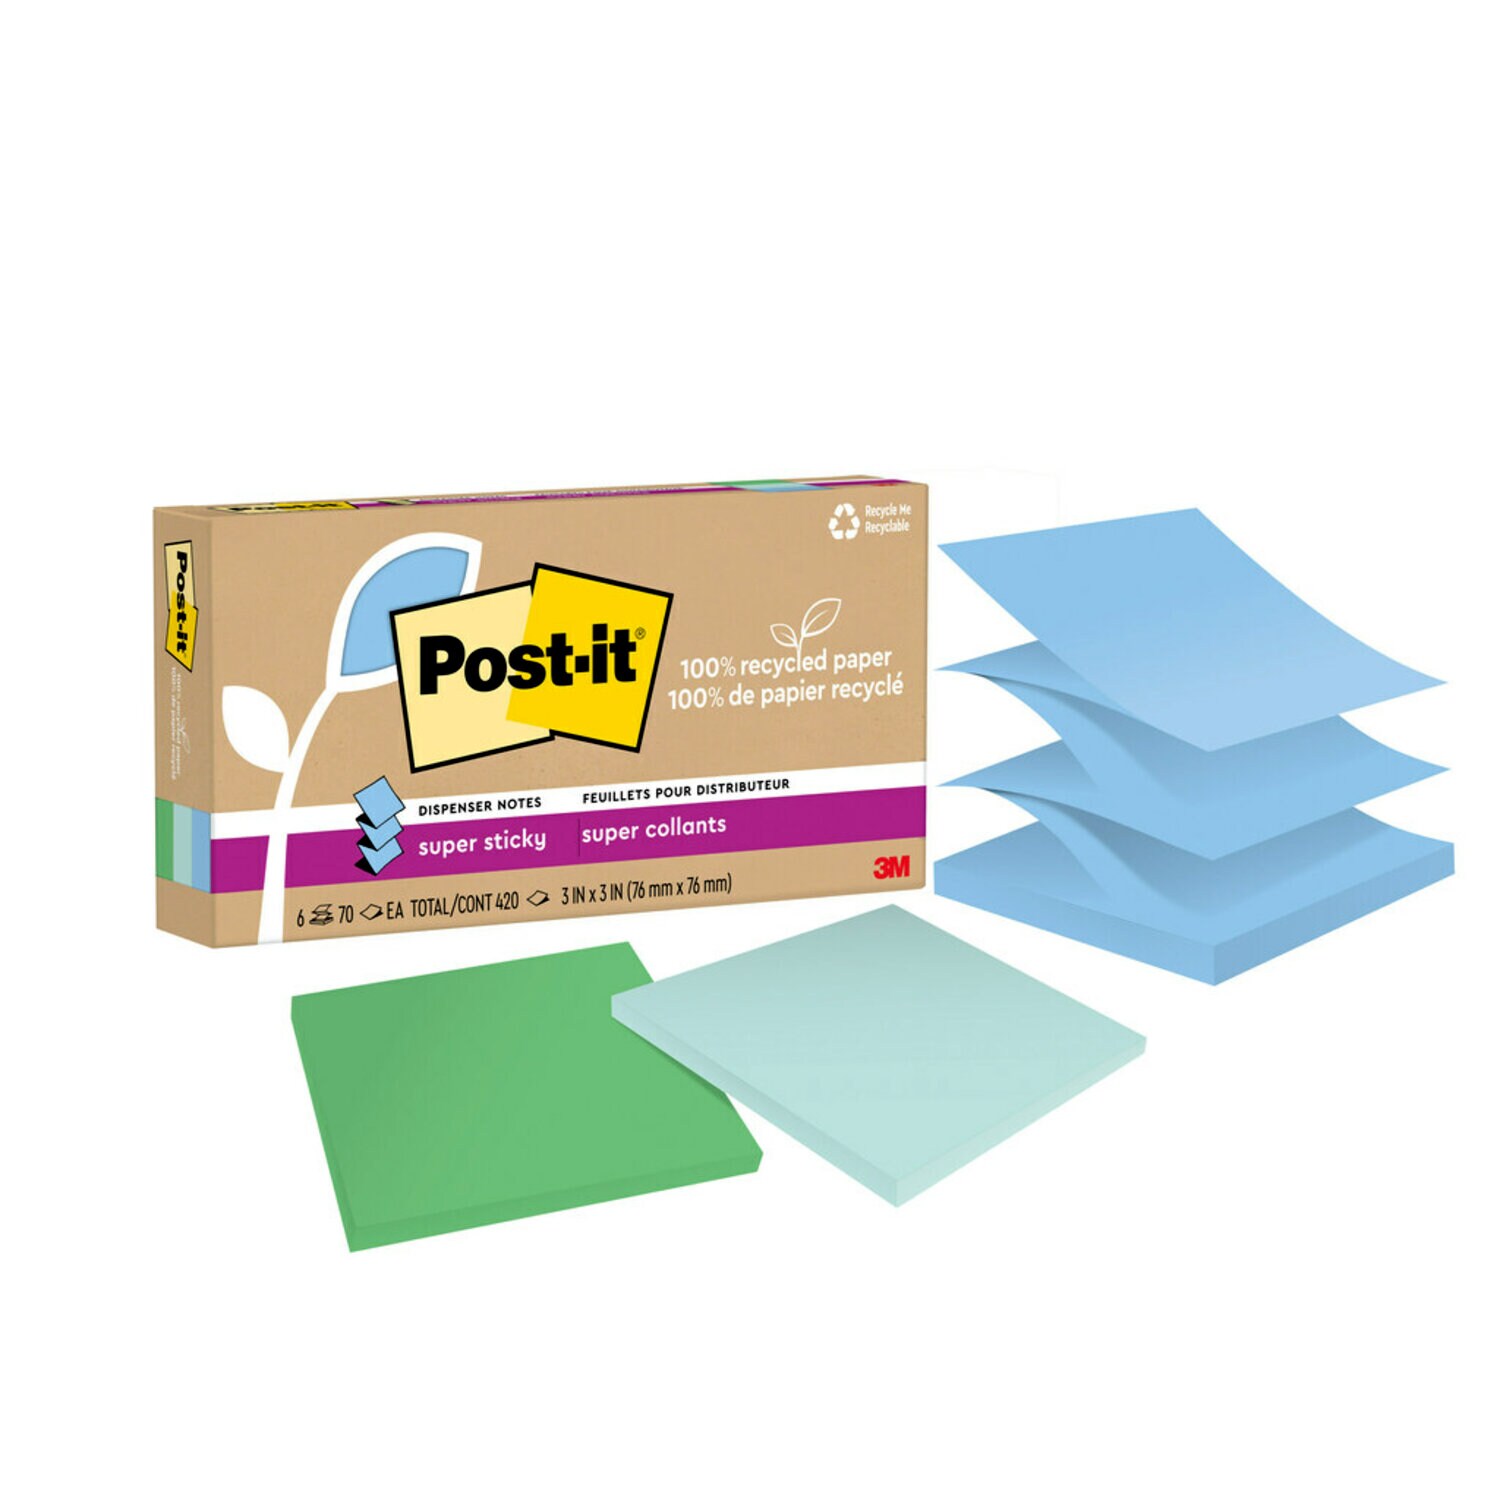 7100290433 - Post-it Super Sticky Recycled Pop-up Notes R330R-6SST, 3 in x 3 in (76 mm x 76 mm)